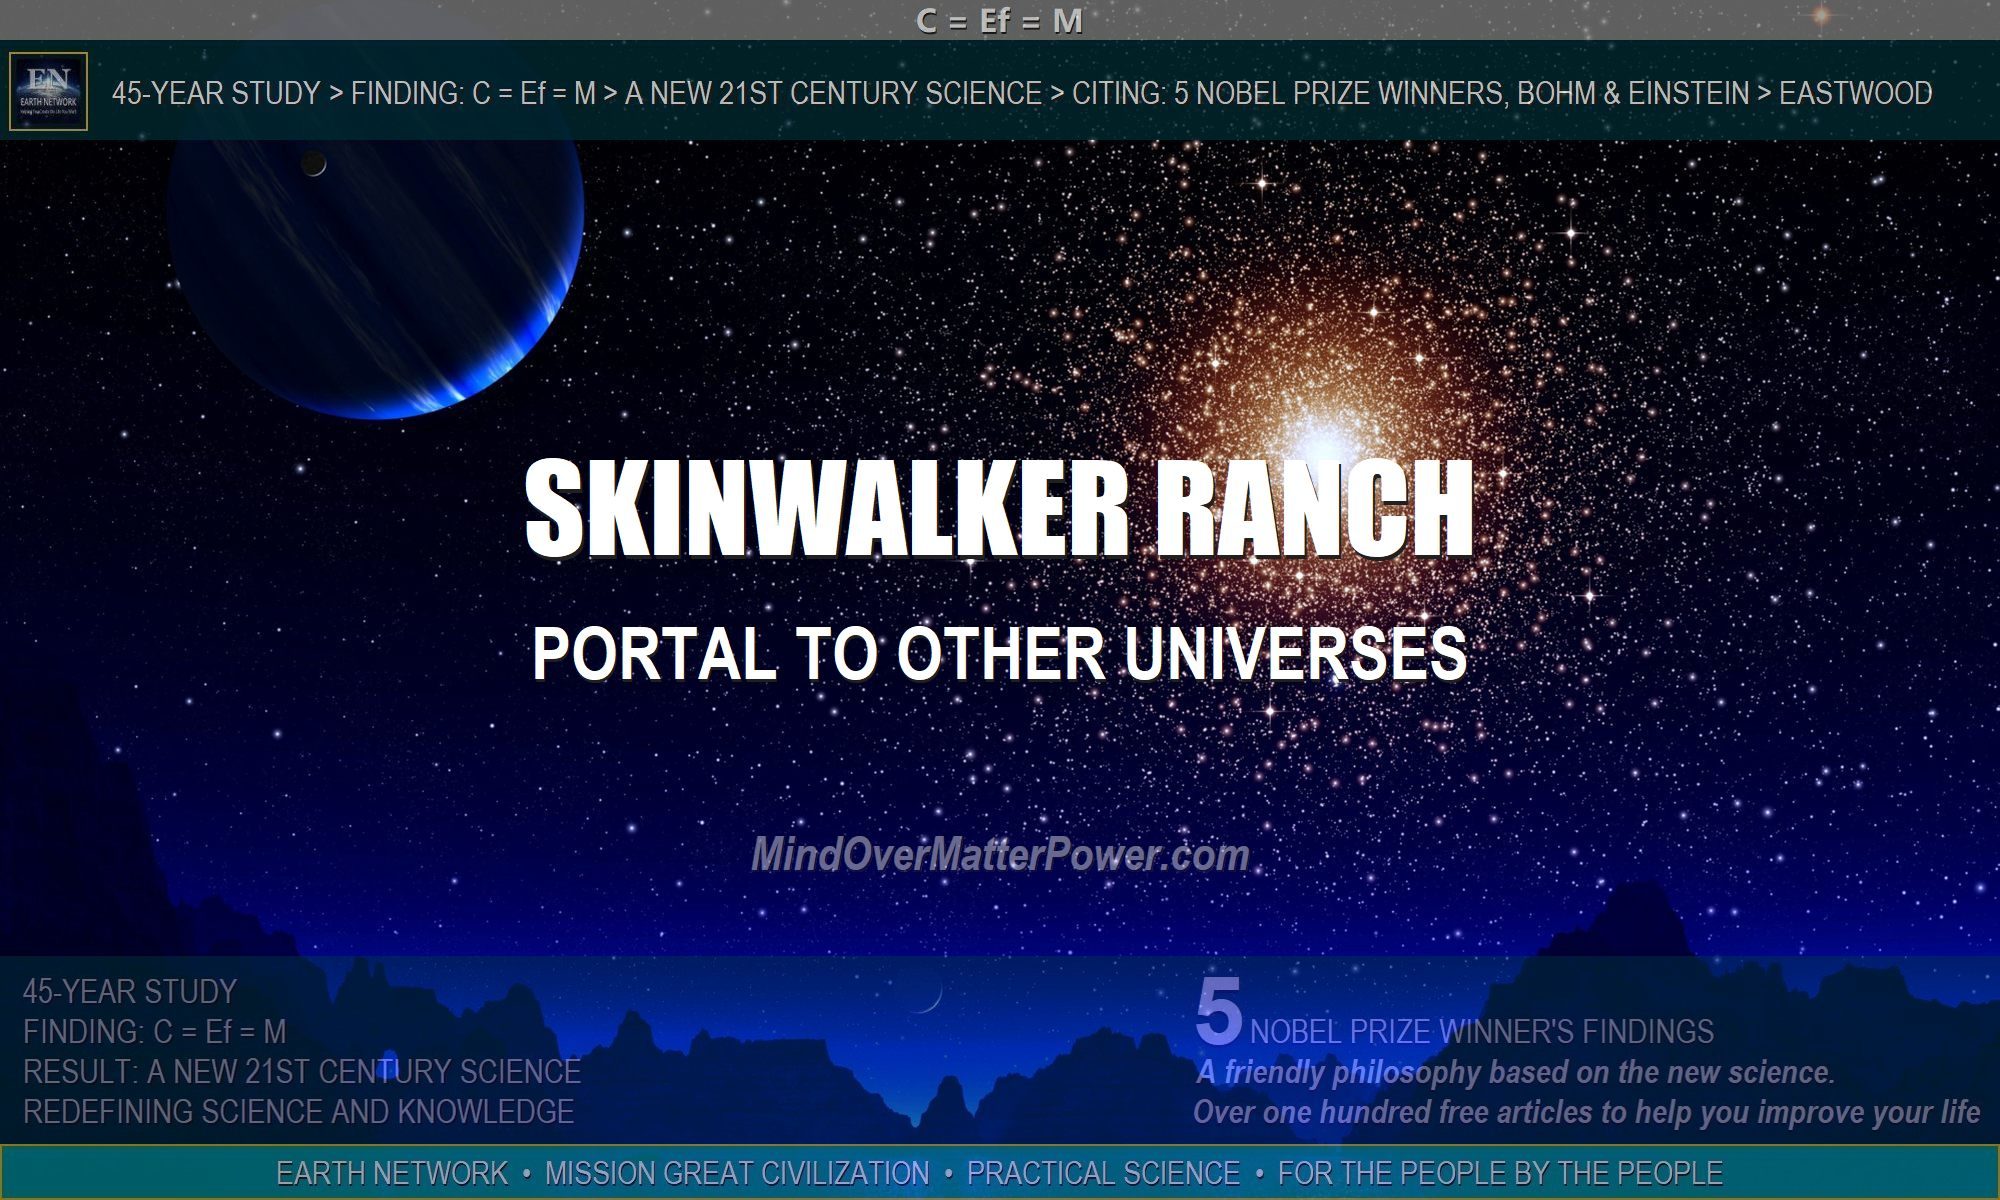 Skinwalker ranch is a portal or vortex gateway to other universes. Worlds overlap in time and space here.